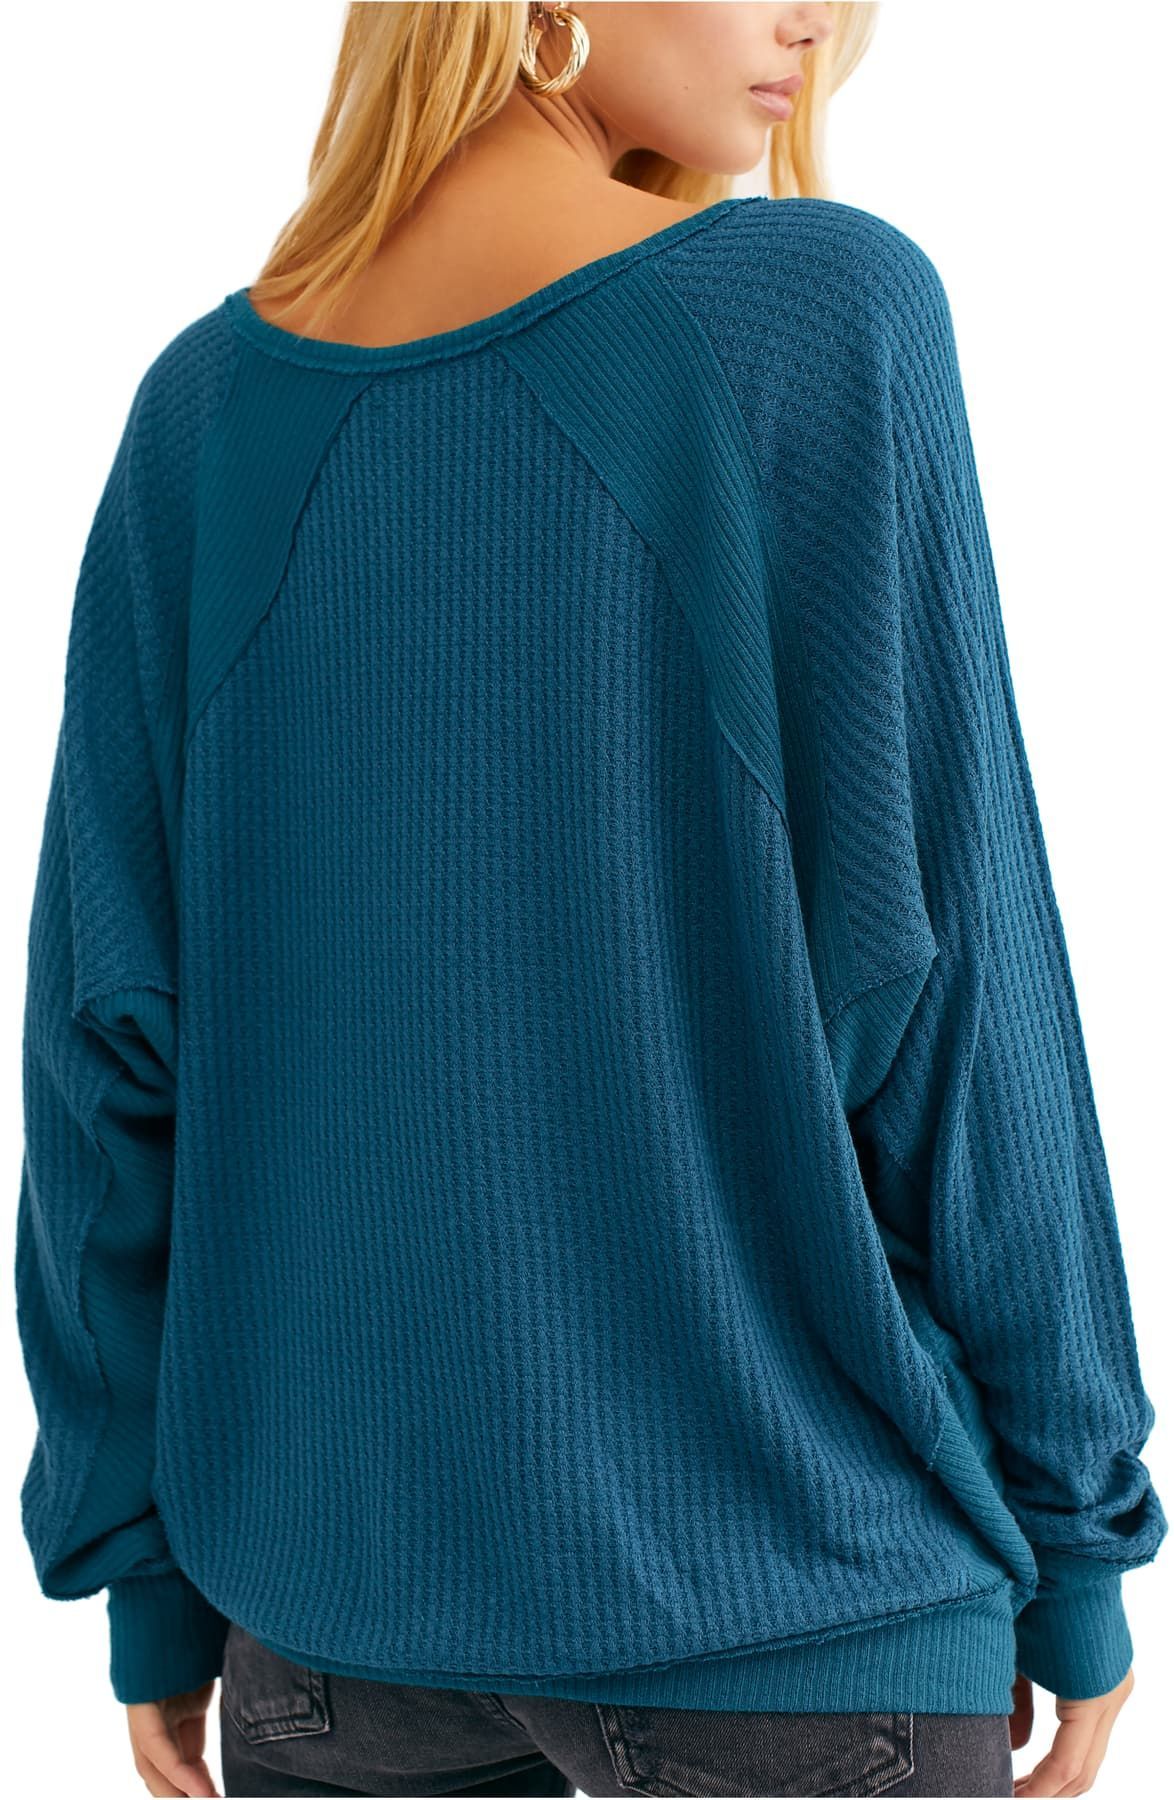 Color: Blues Size Type: Regular Size (Women's): XS Sleeve Length: Long Sleeve Type: Blouse Style: Knit Top Neckline: V-Neck Pattern: Solid Theme: Classic Material: Rayon